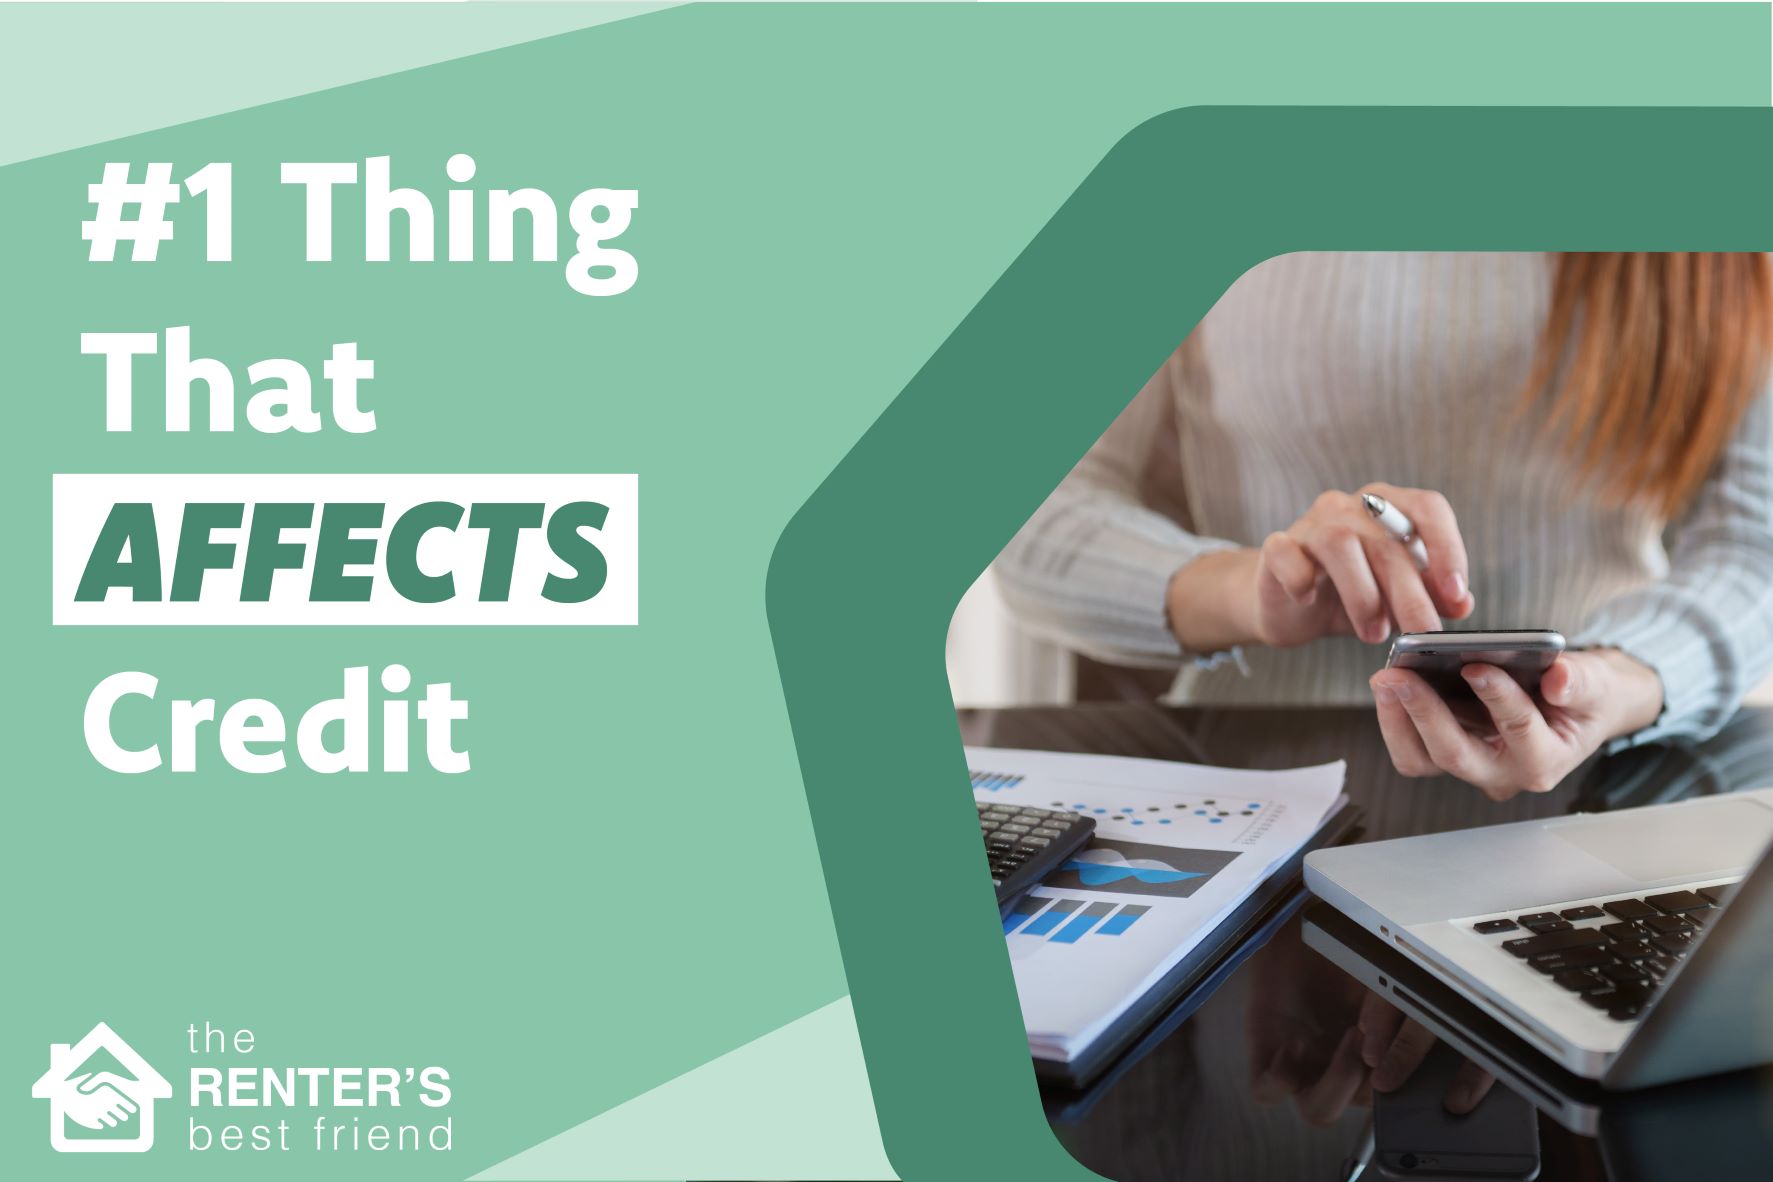 #1 thing that affects credit (and more)